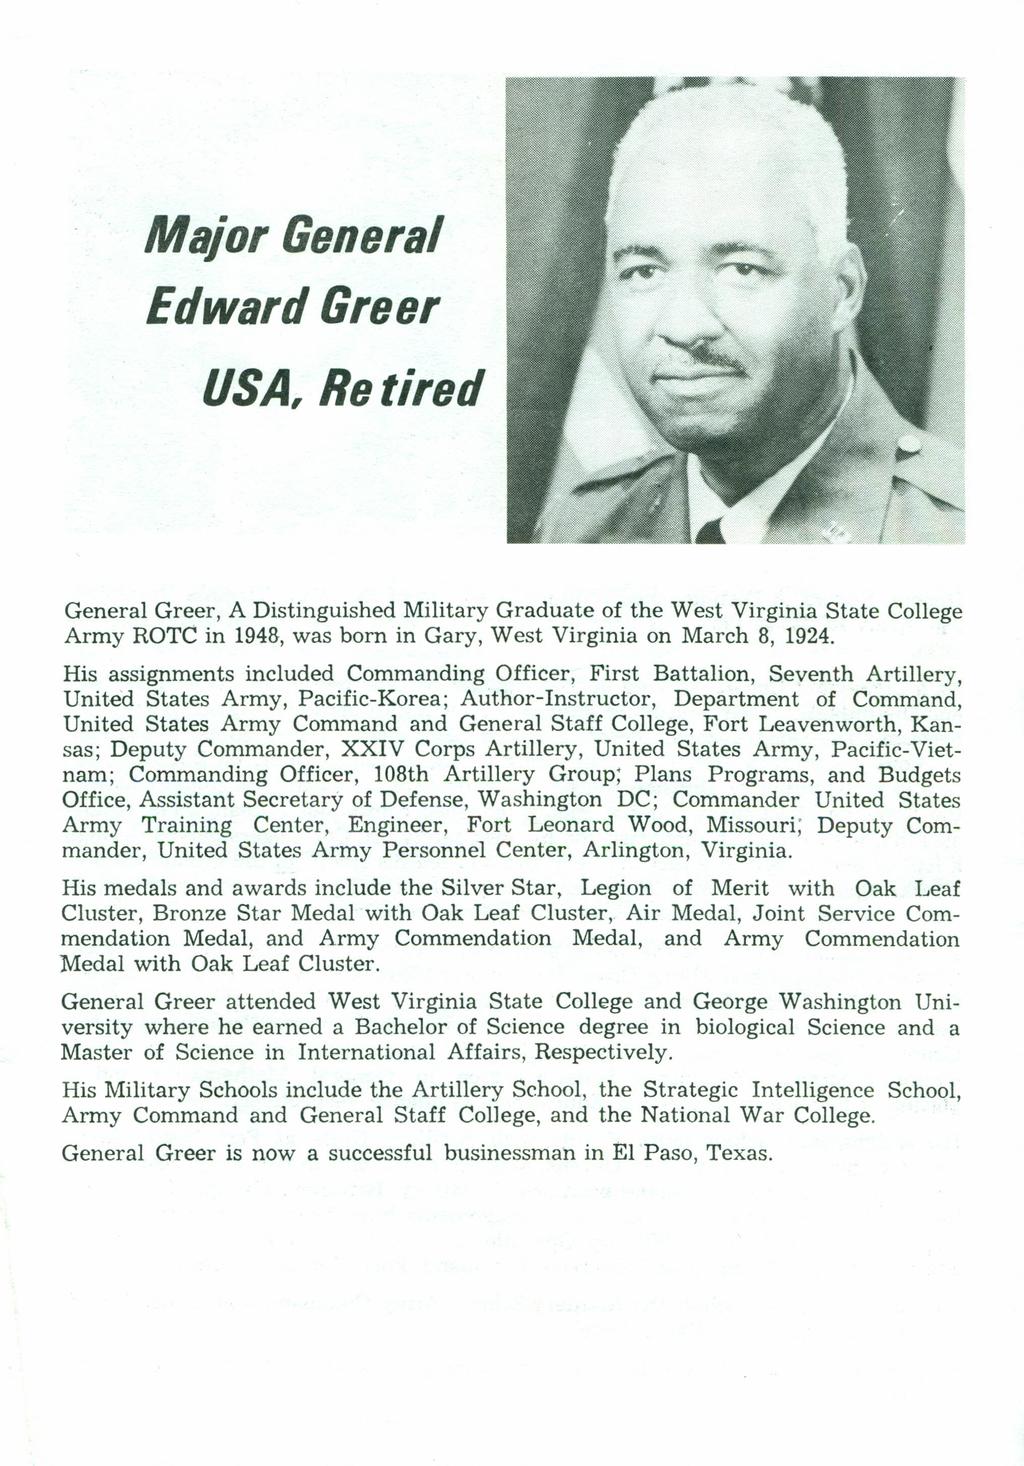 Major General Edward Greer USA, Re tired General Greer, A Distinguished Military Graduate of the West Virginia State College Army ROTC in 1948,was born in Gary, West Virginia on March 8, 1924.